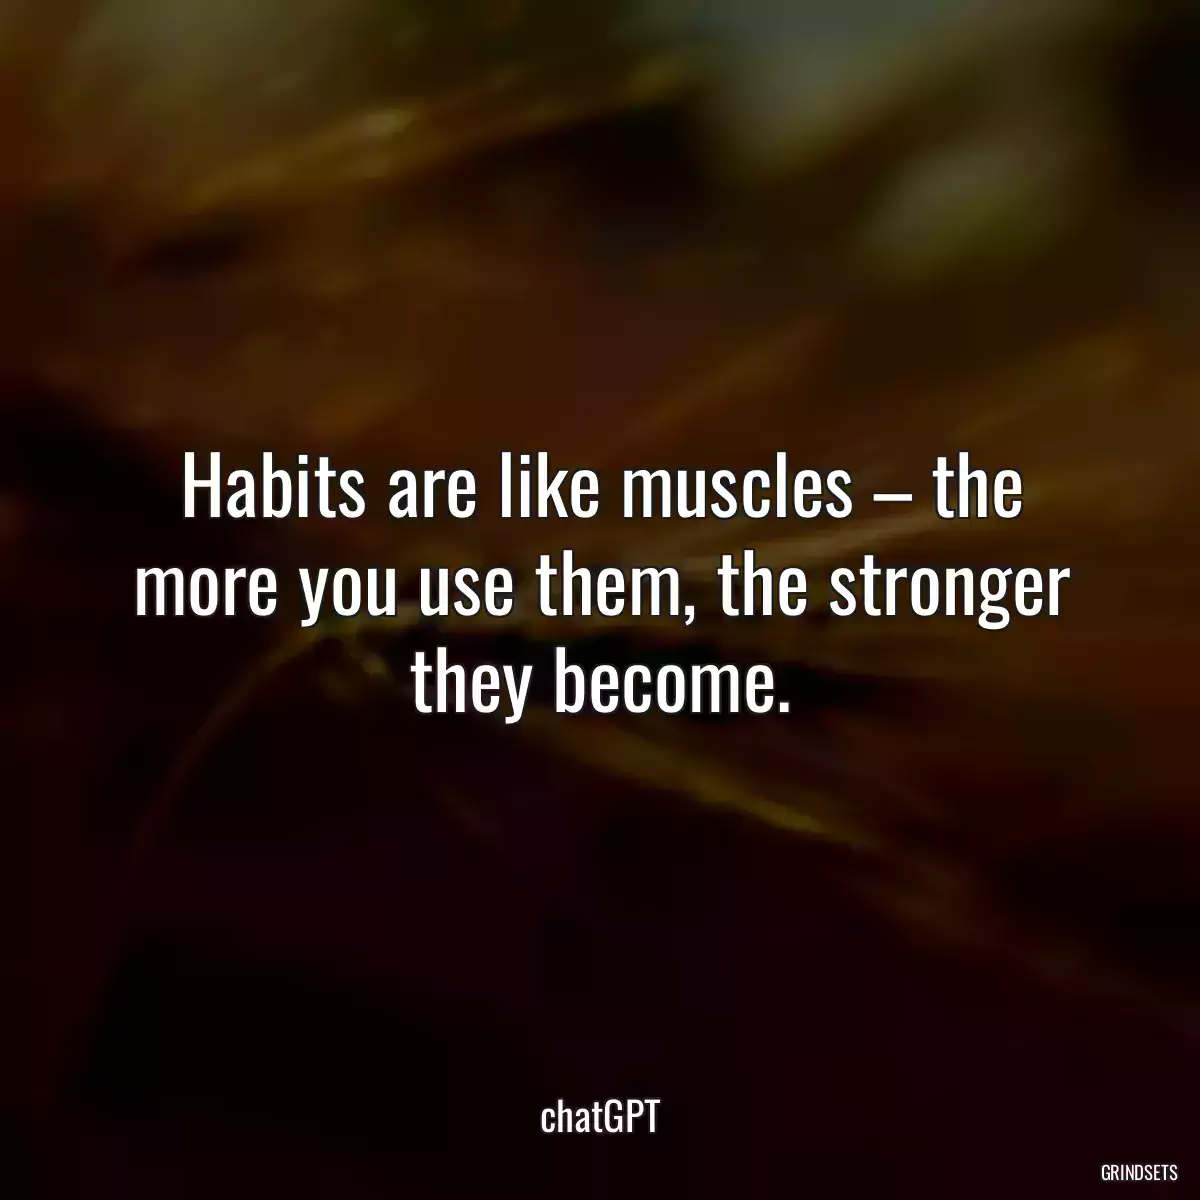 Habits are like muscles – the more you use them, the stronger they become.